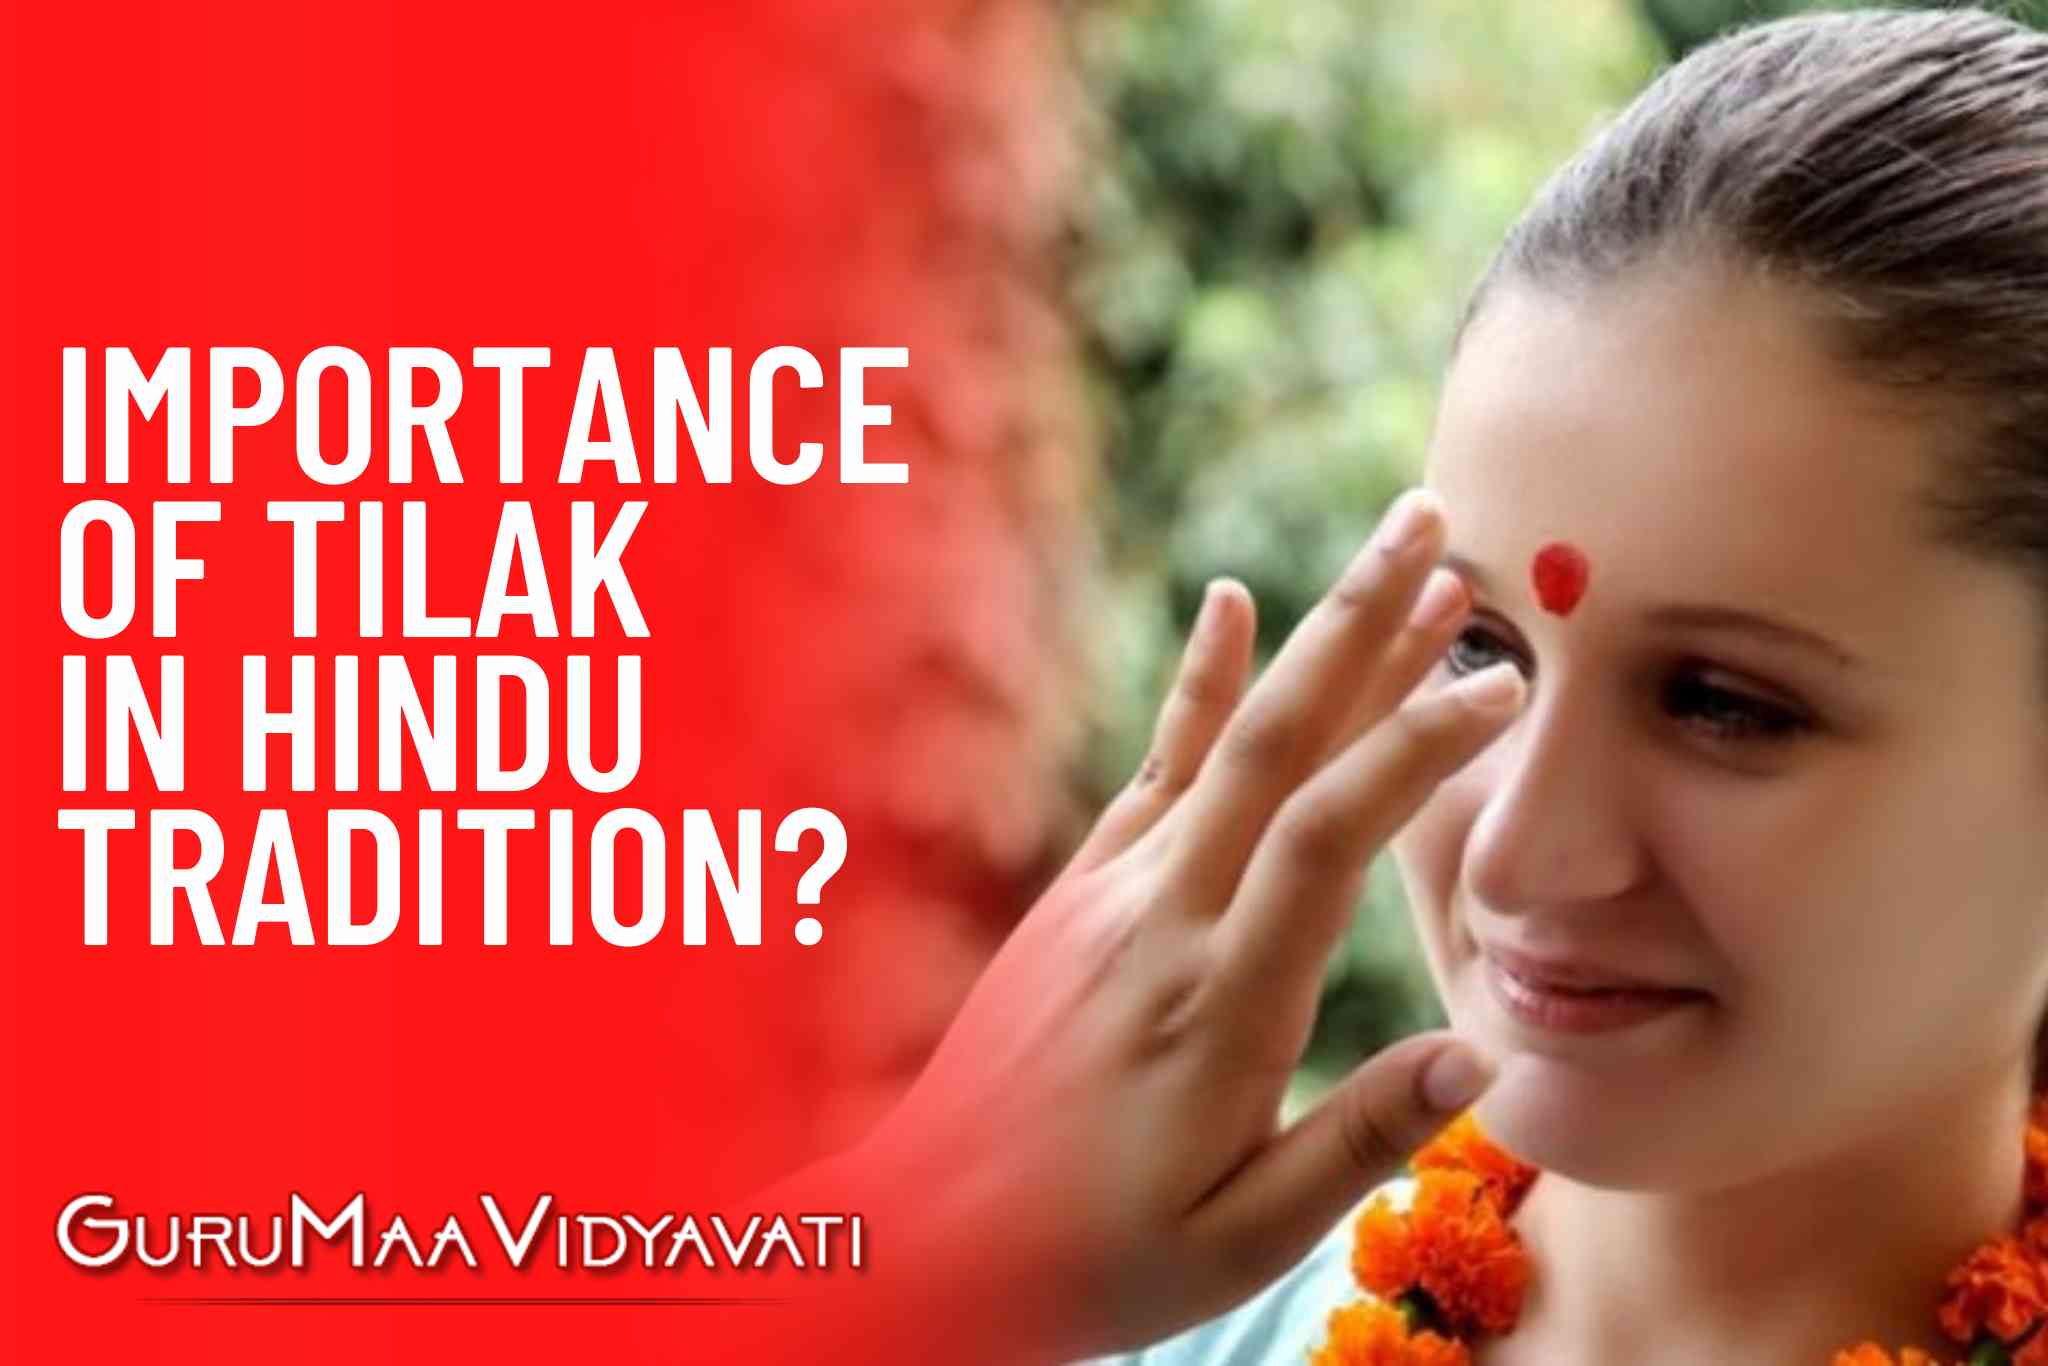 What Is The Importance Of Tilak In Hindu Tradition?